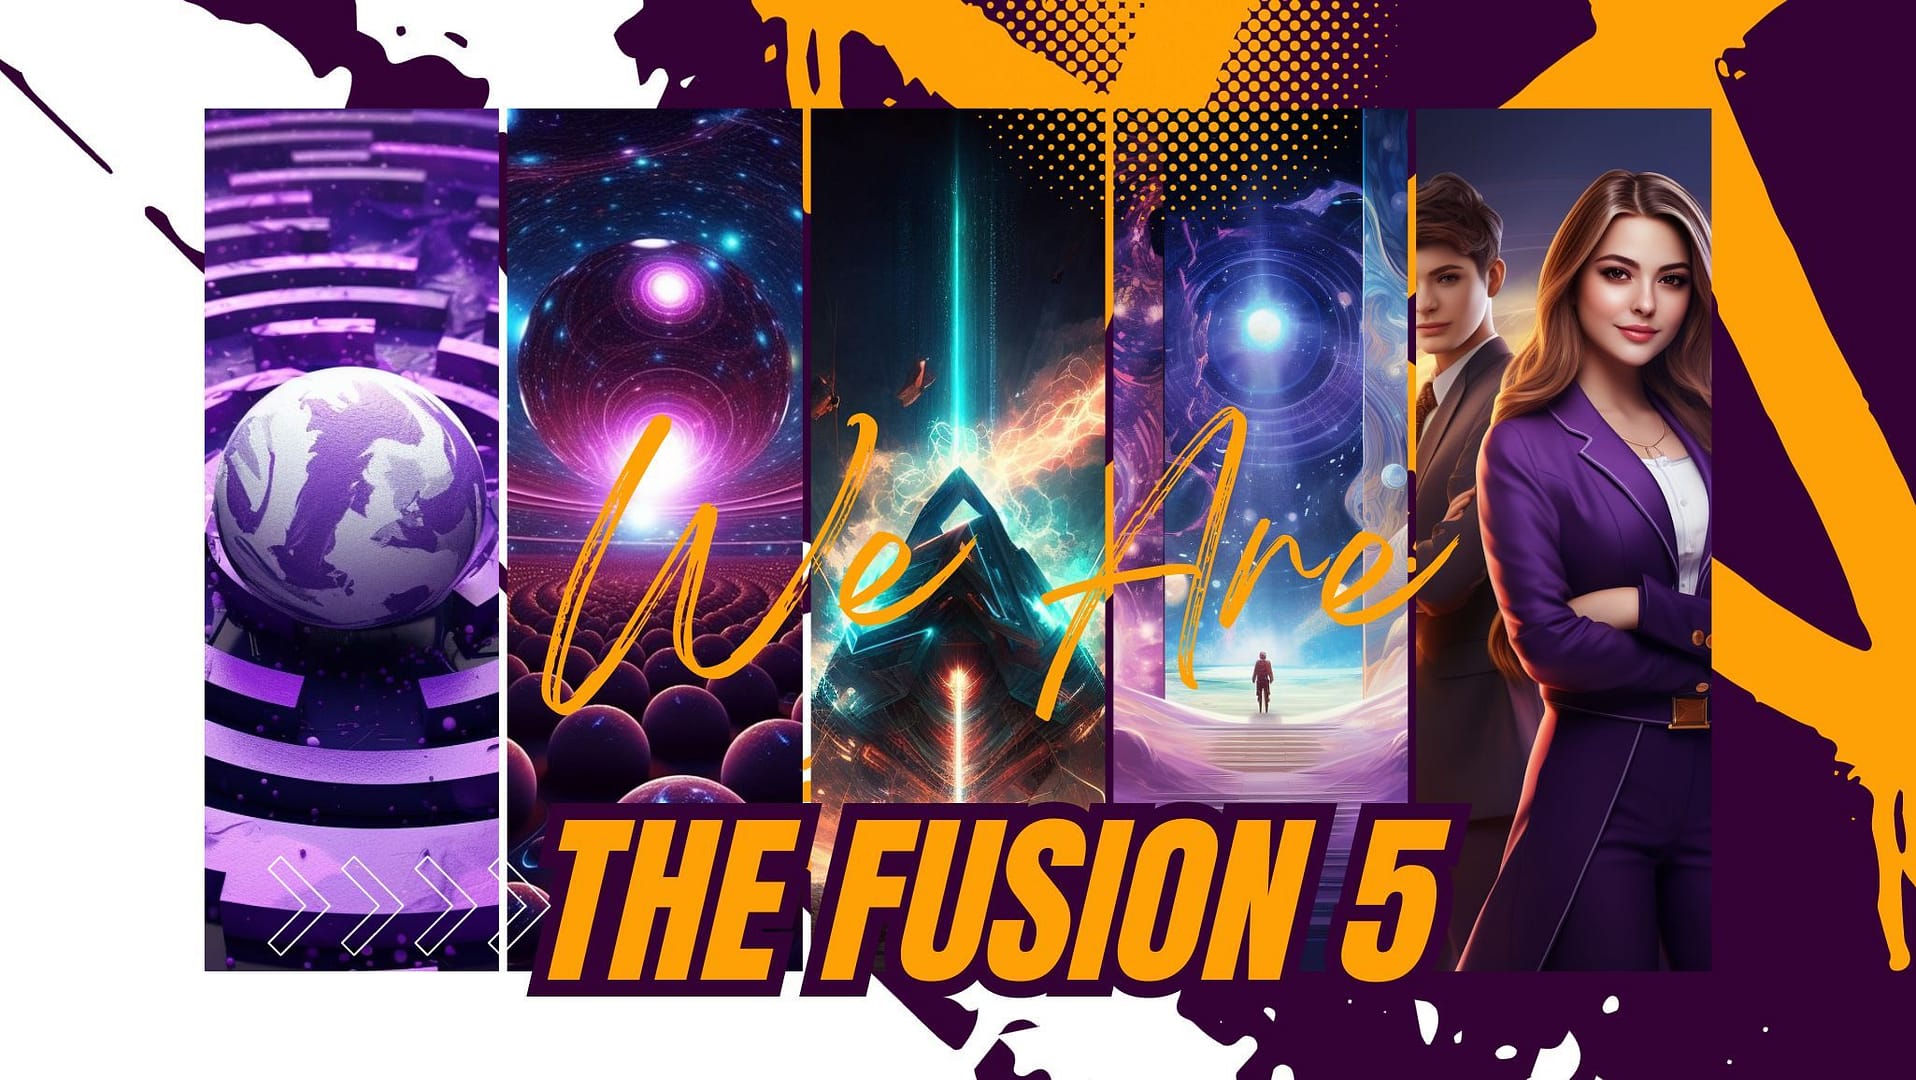 We are The Fusion 5 - Five United Subjects